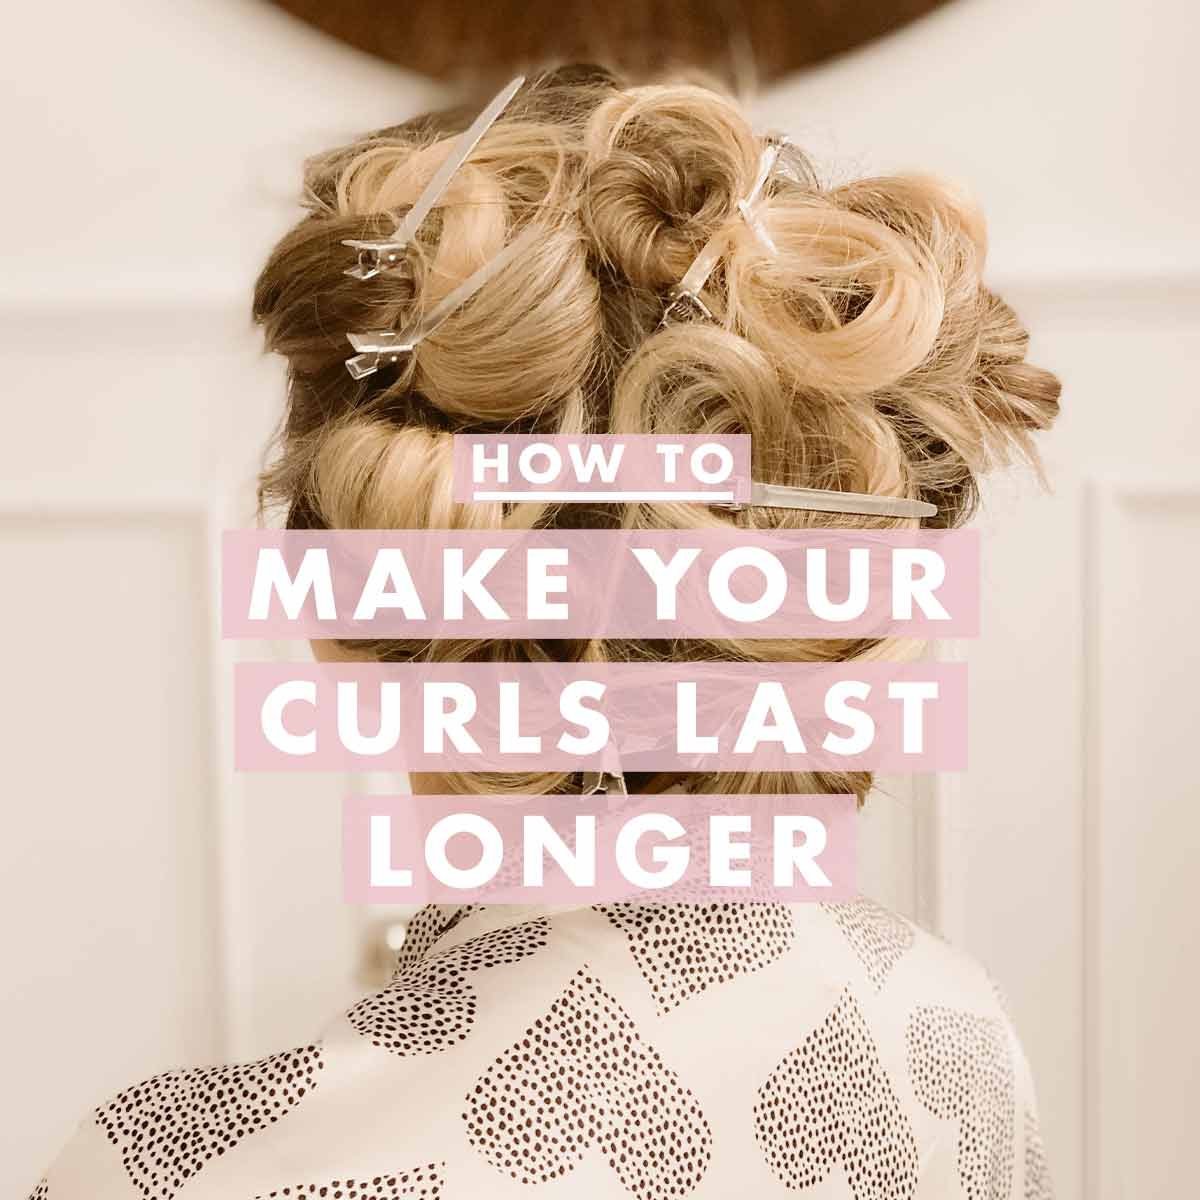 How to make your curls last longer